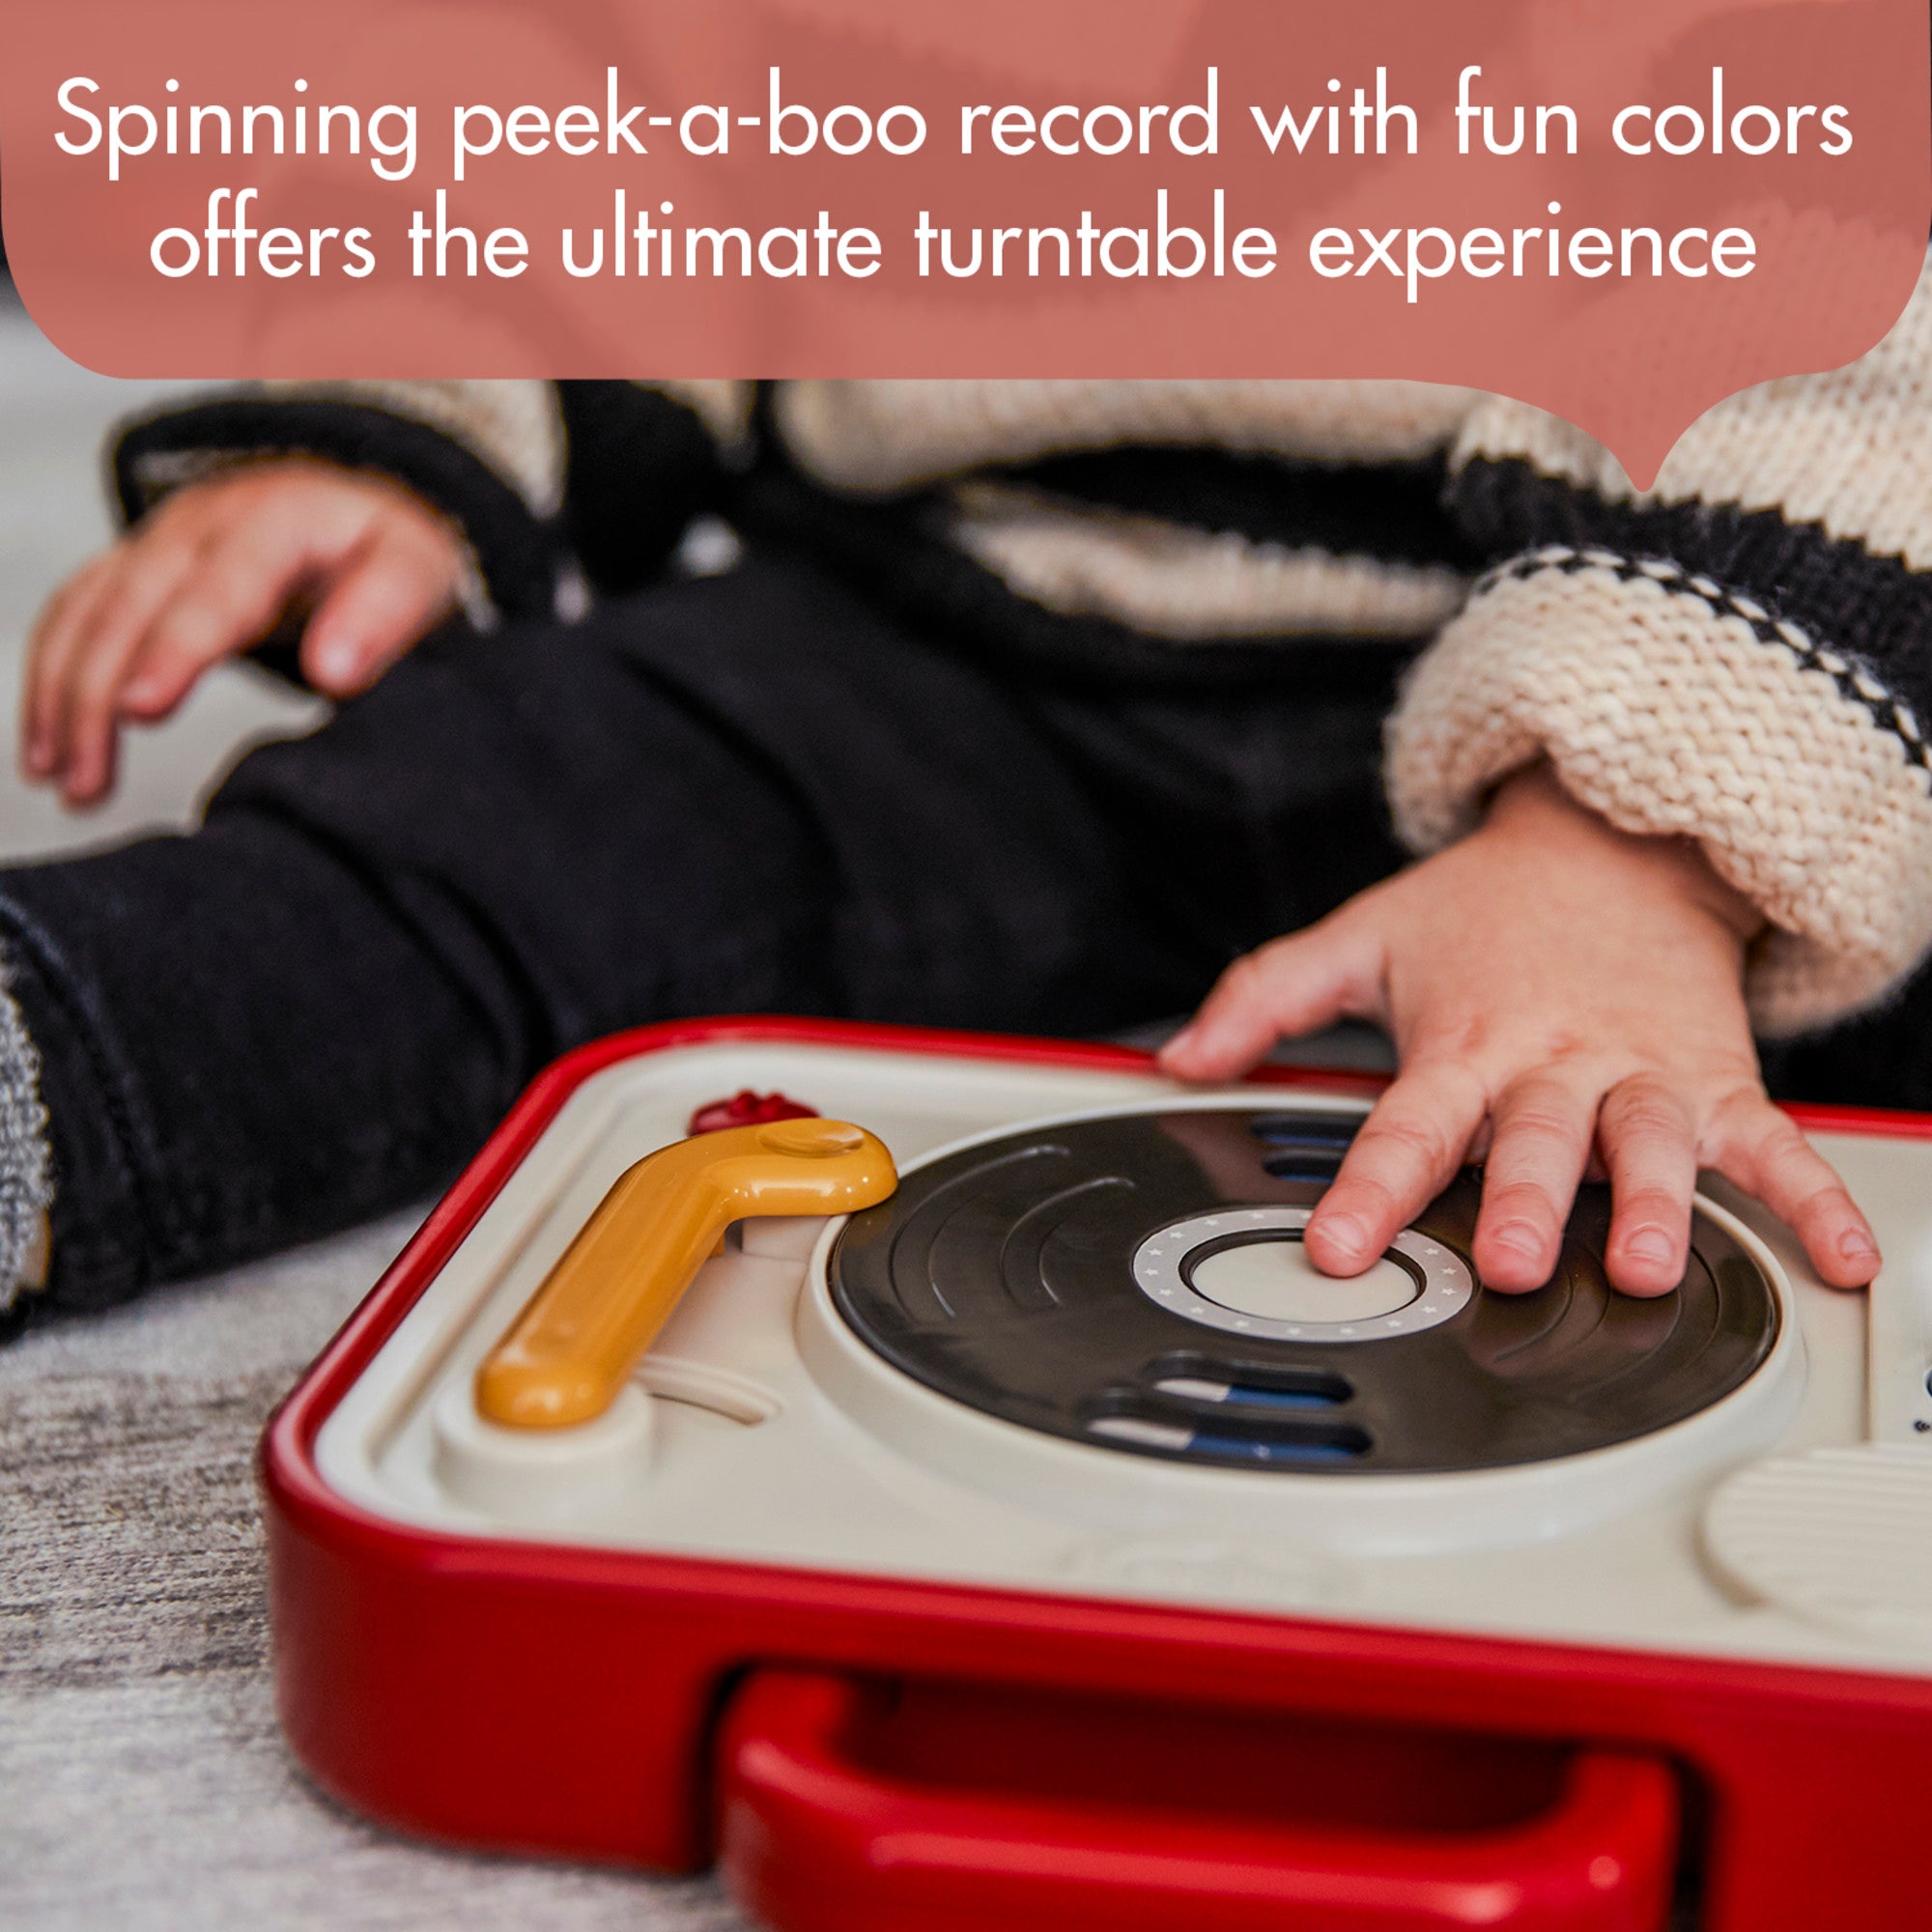 Tiny Rockers DJ Station - Pitch slider adds an extra layer of fun, encouraging babies to experiment with sound and inspiring creativity